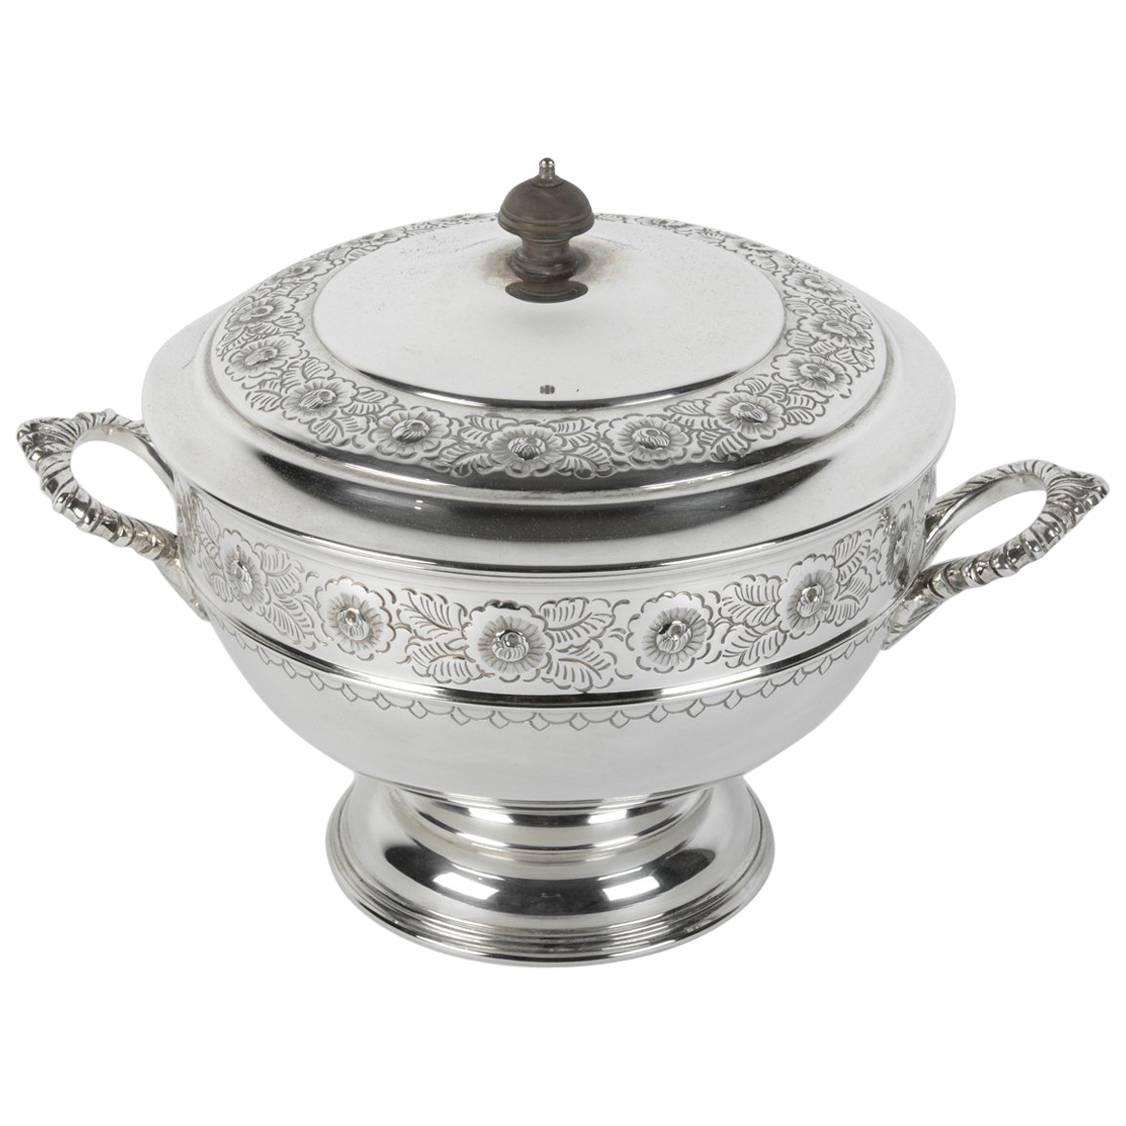 Old English Sheffield Silver Plated Covered Tureen